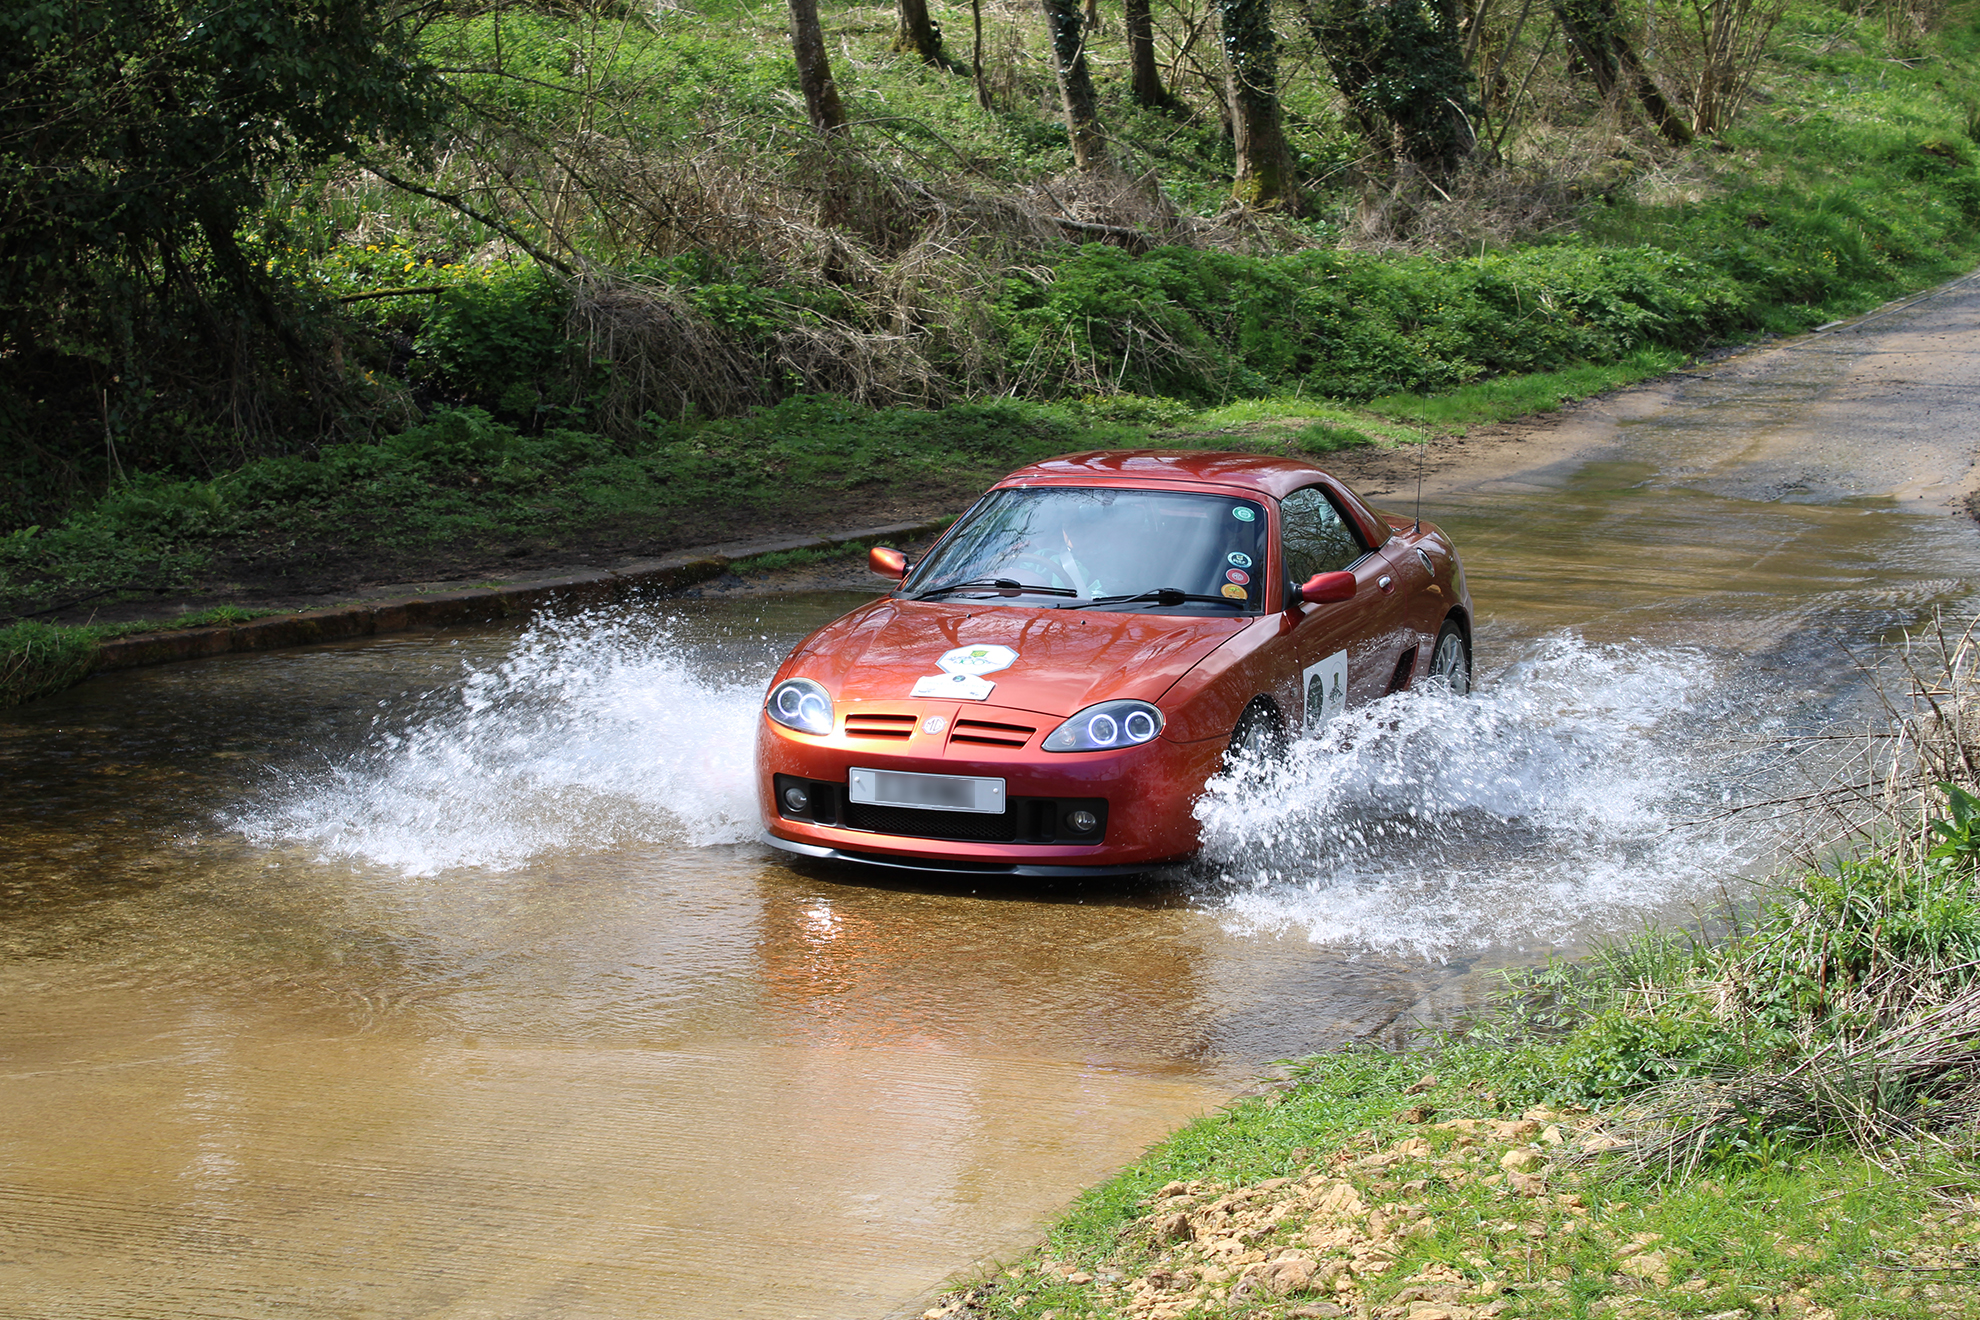 MG car fording water